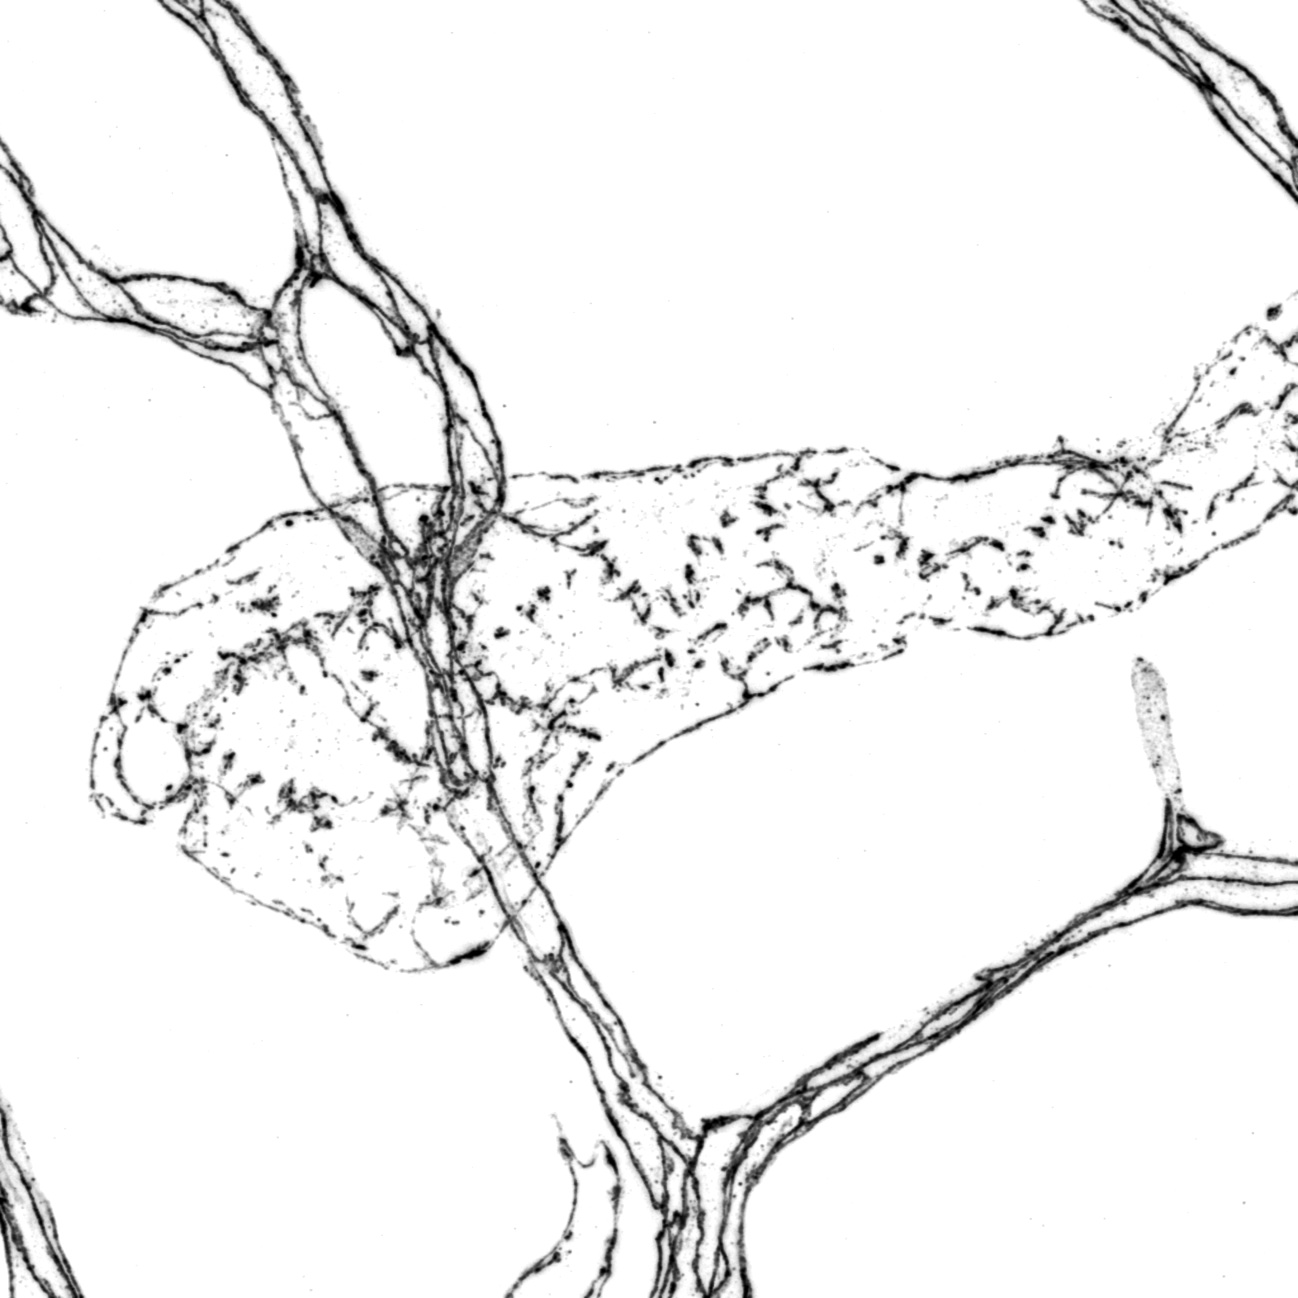 'Button' cell junctions in a lymphatic capillary